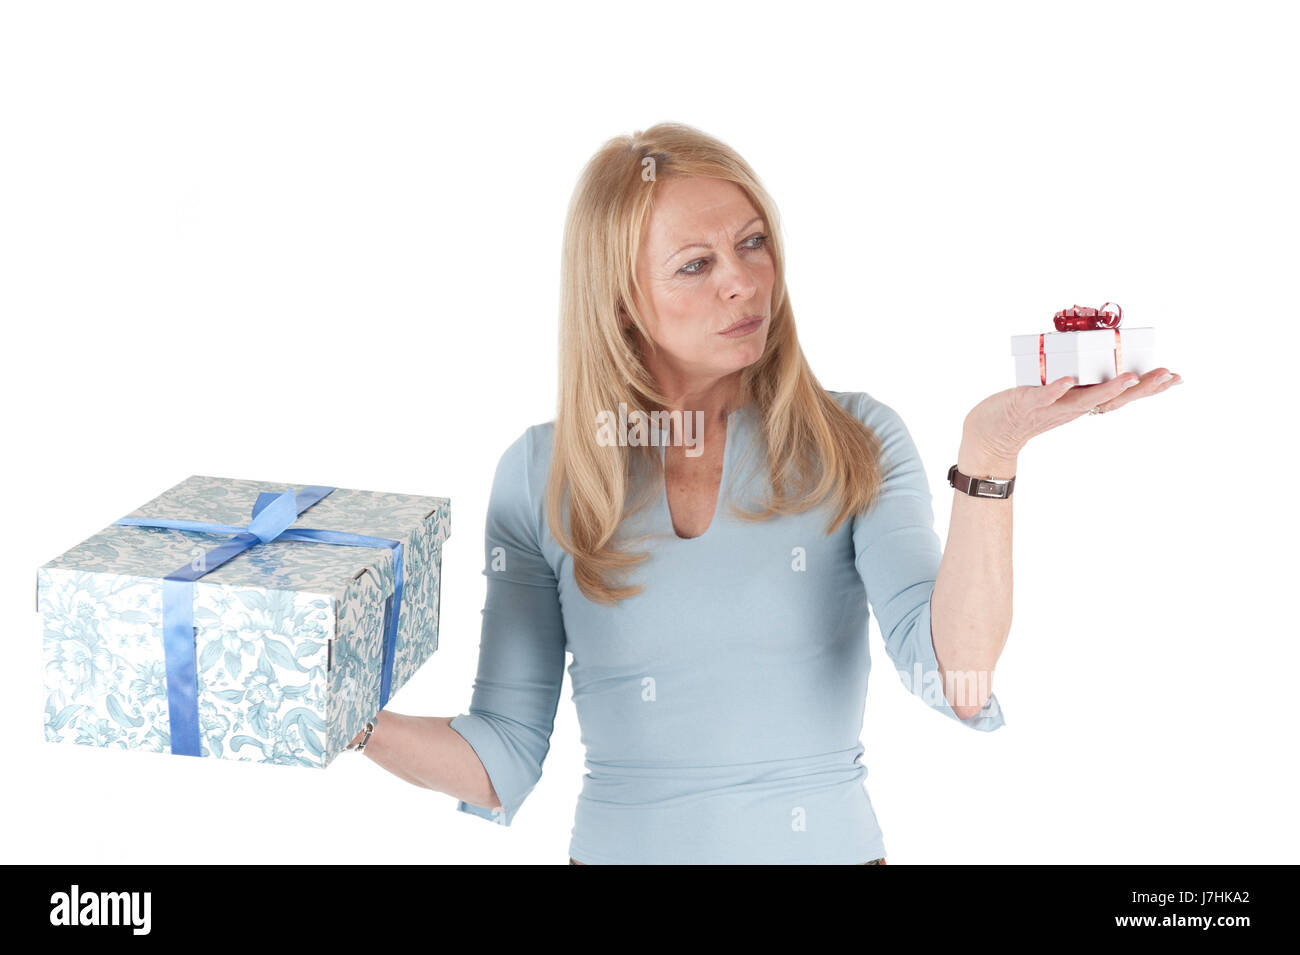 ckchen woman with two p Stock Photo